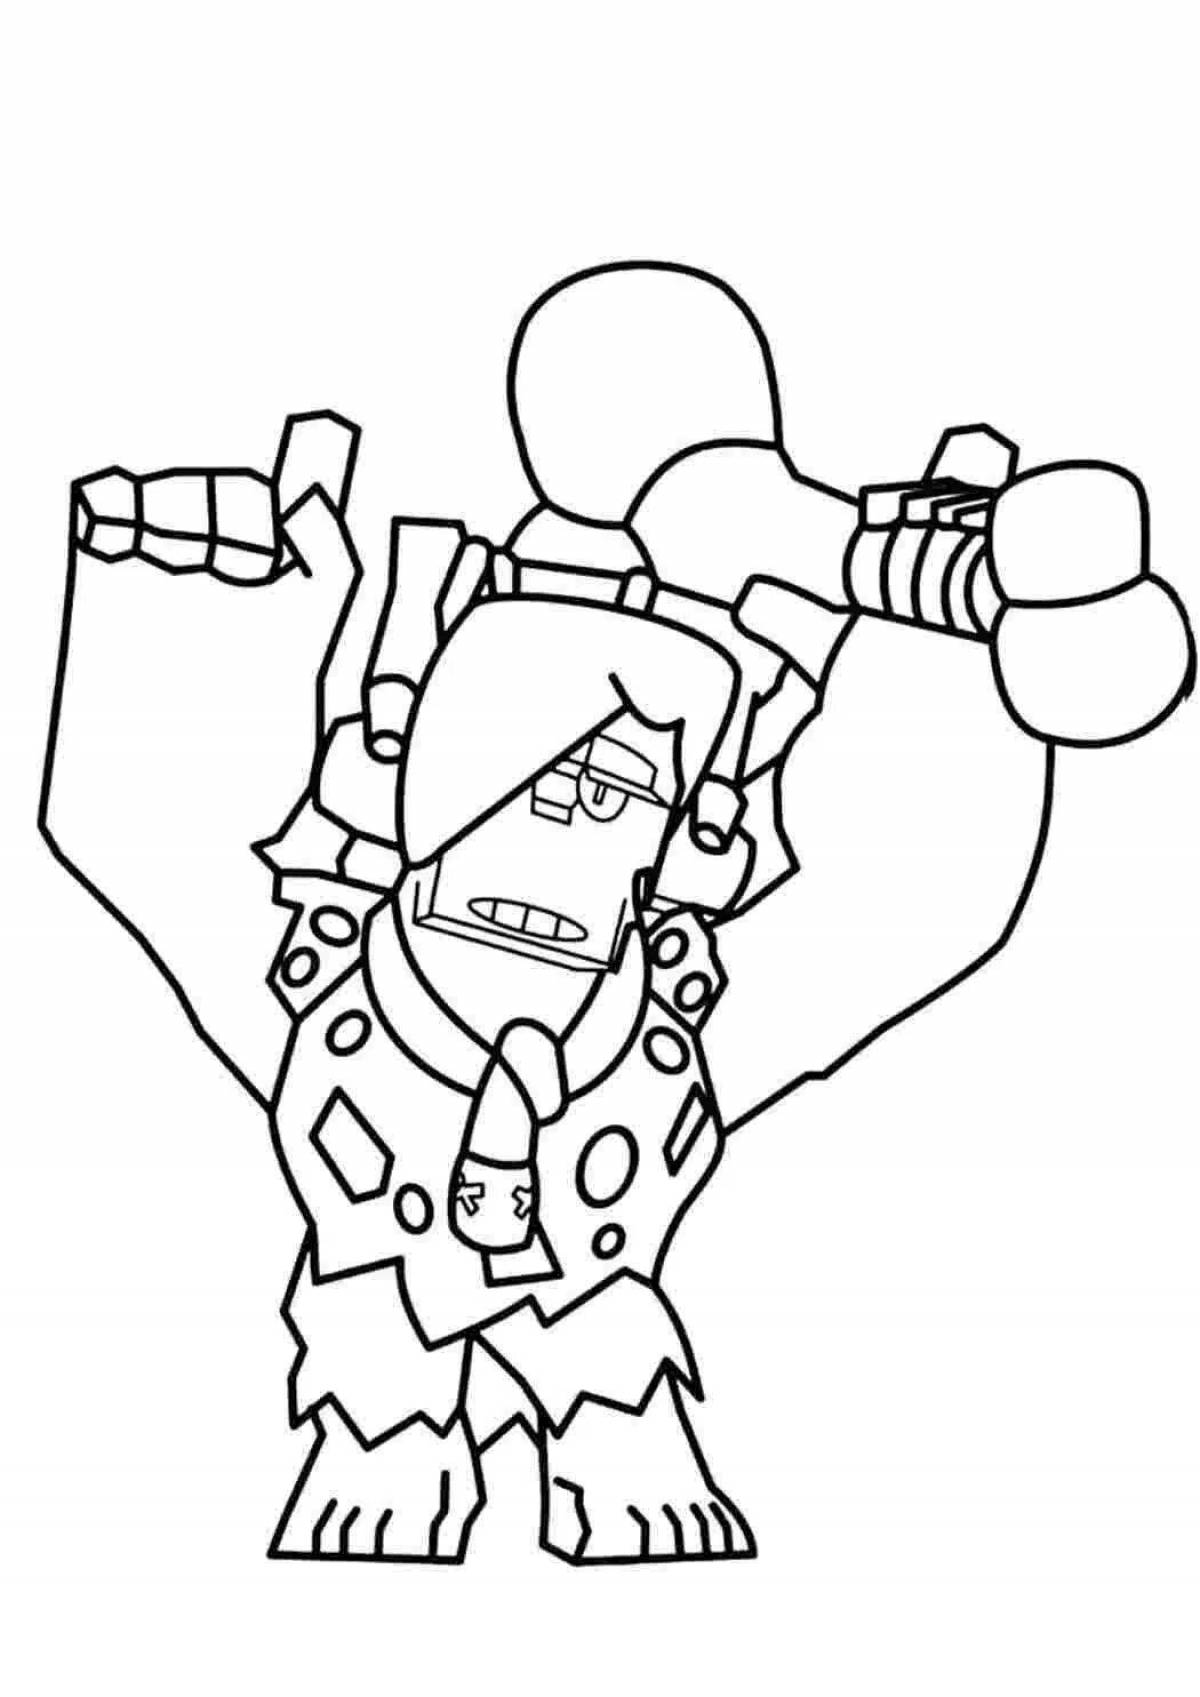 Playful bad container coloring page